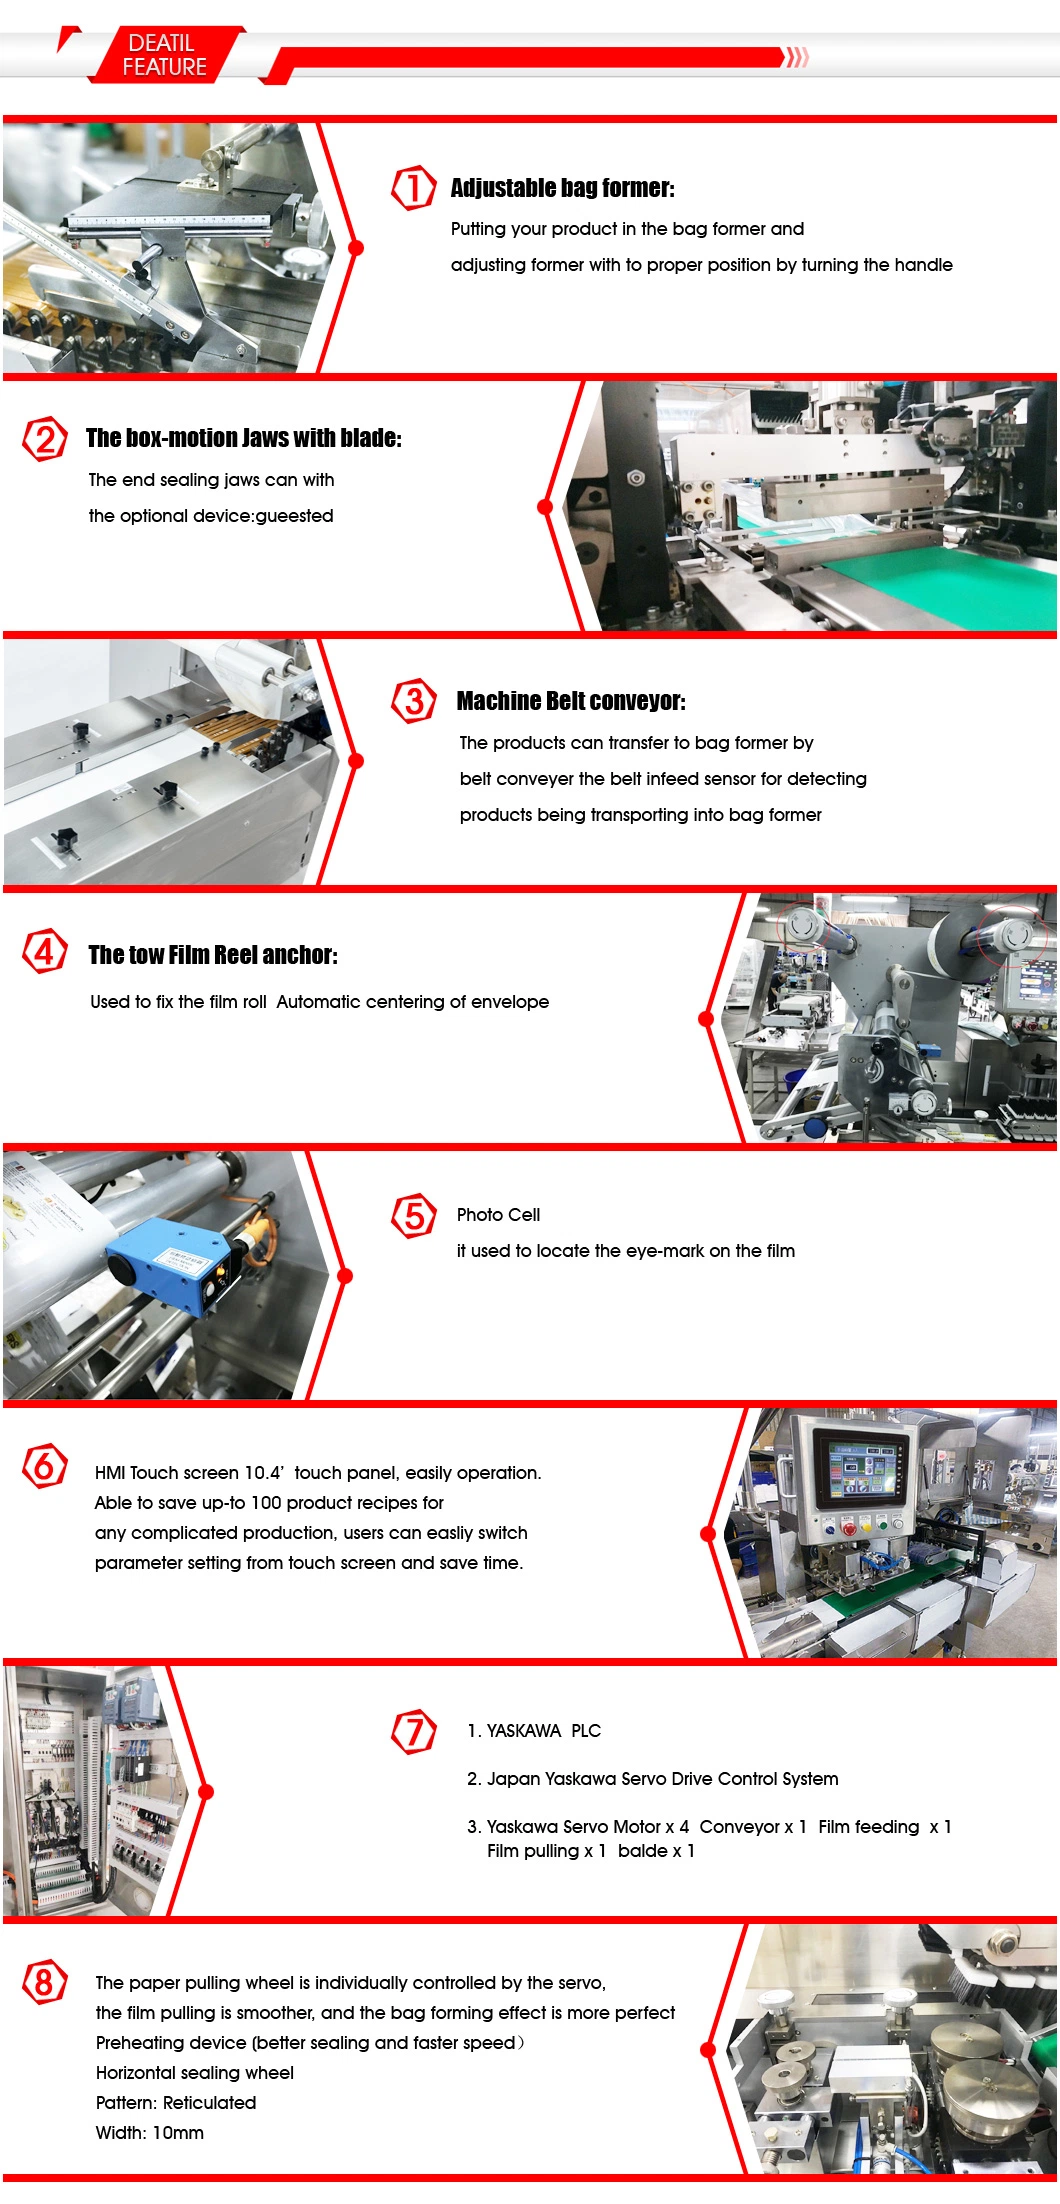 Pizza Bread Frozen Dumplings Noondles Buns Muffin Hamburger Cake Bakery Food Automatic Flow Pack Packing Package Packaging Machine